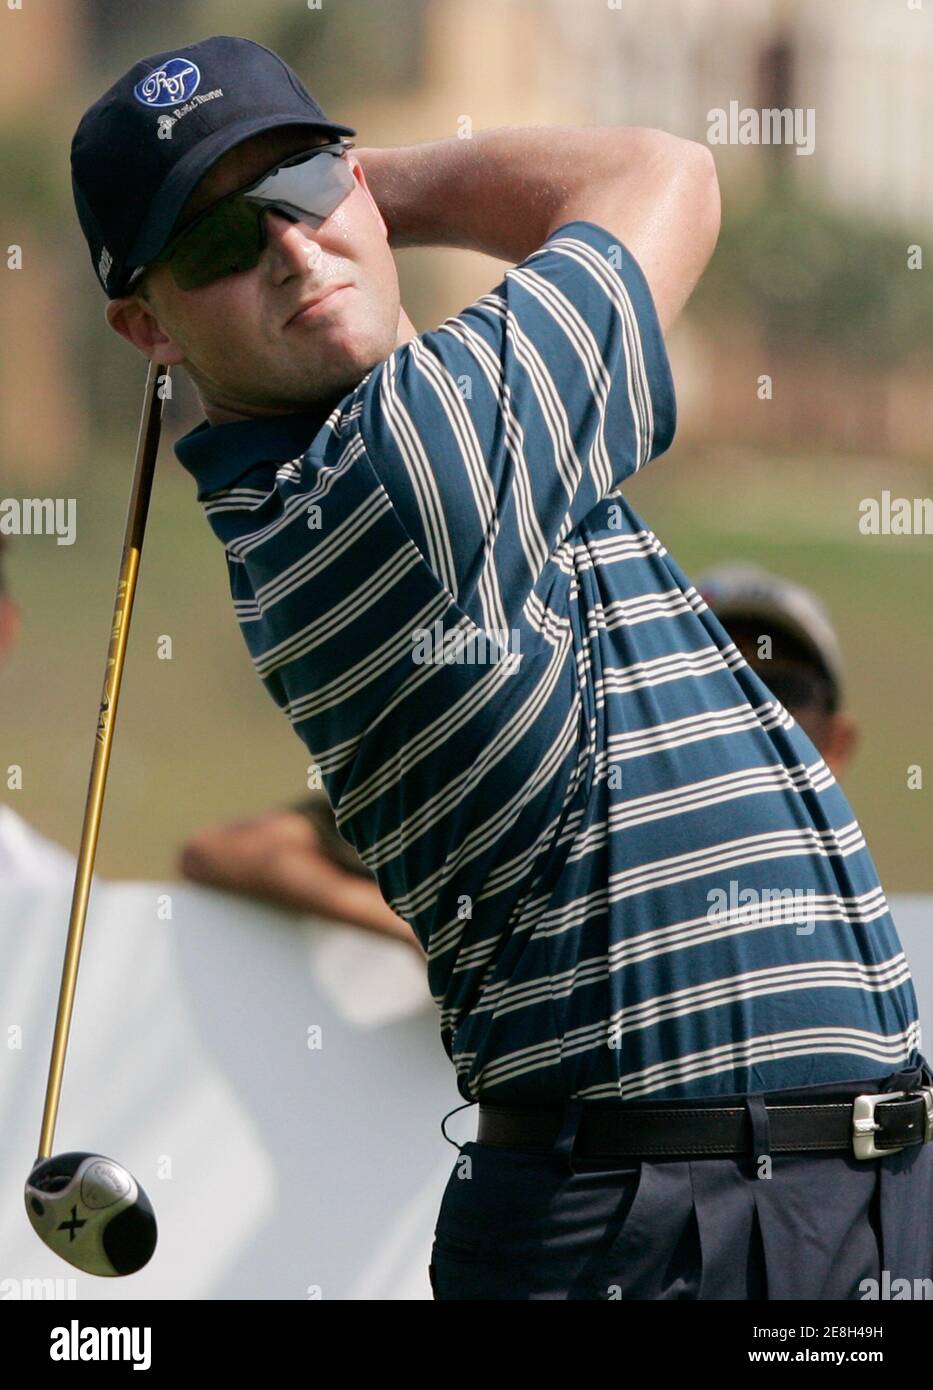 Niclas Fasth of Sweden tees off on the 3rd hole during the four-ball match of the Royal Trophy Europe vs Asia Golf Championship at Amata Spring Country Club on the outskirts of Bangkok January 13, 2007. REUTERS/Chaiwat Subprasom (THAILAND) Stock Photo